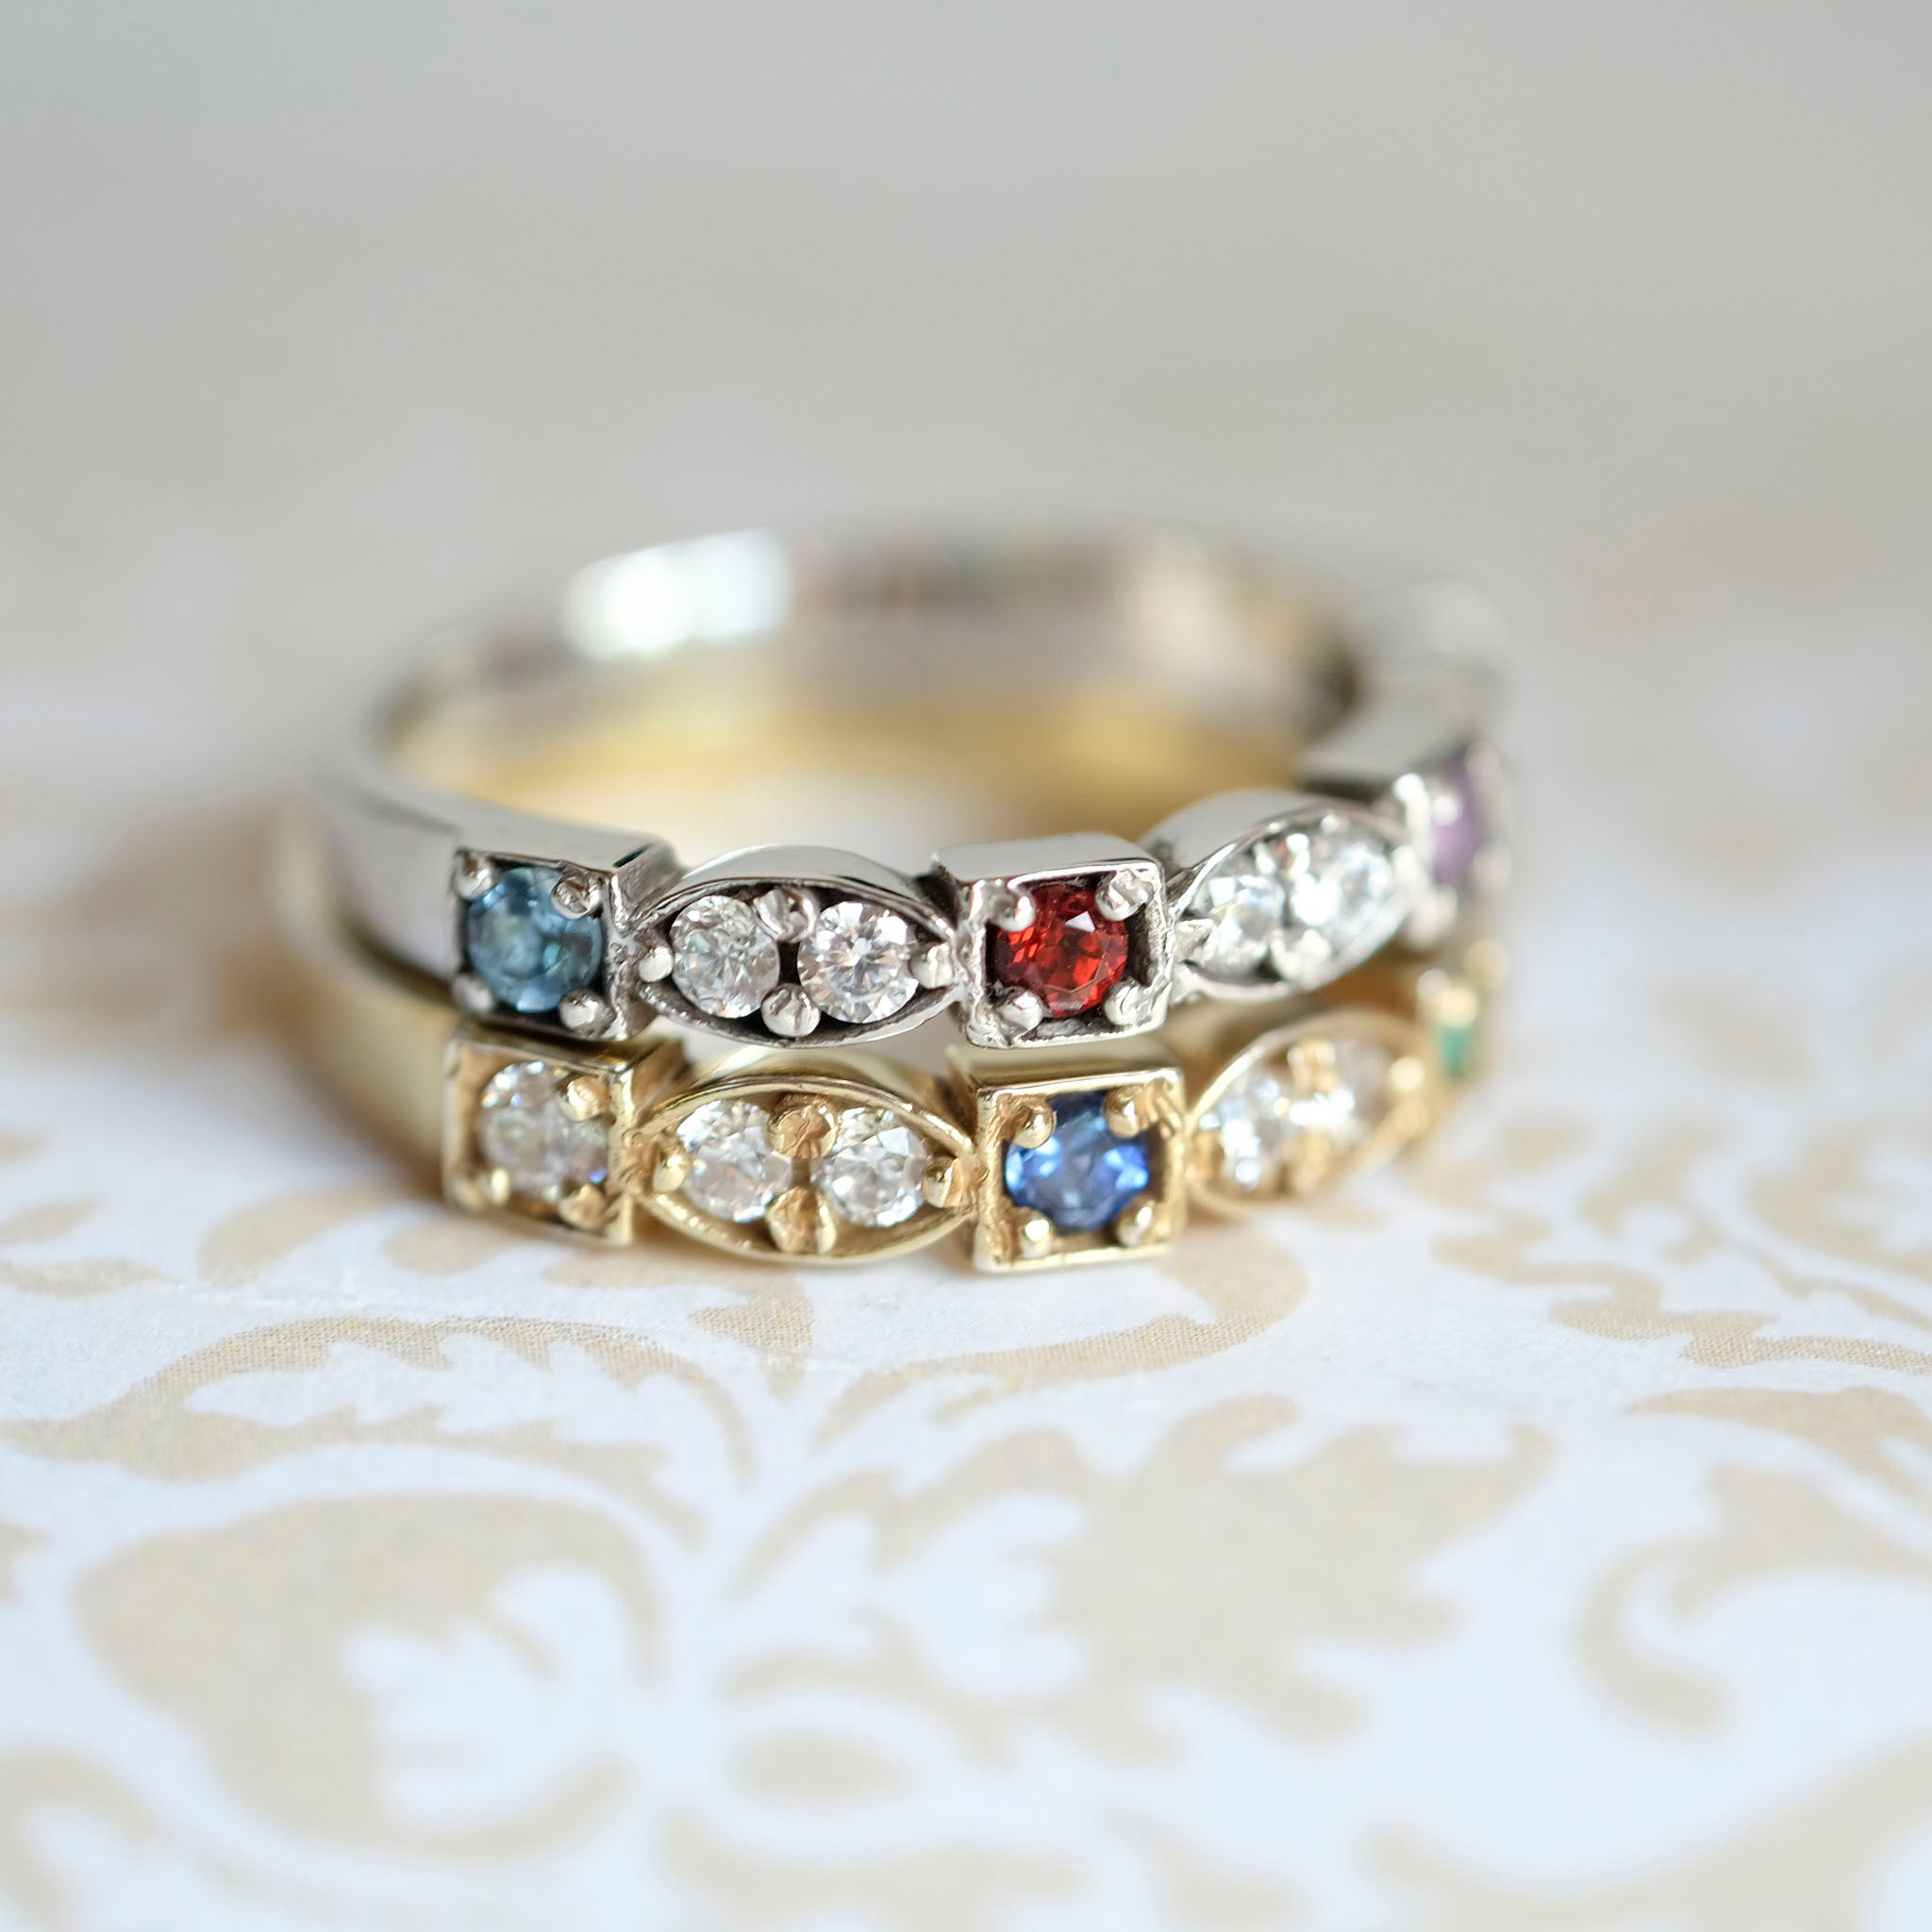 Birthstone rings with ruby, diamonds, 